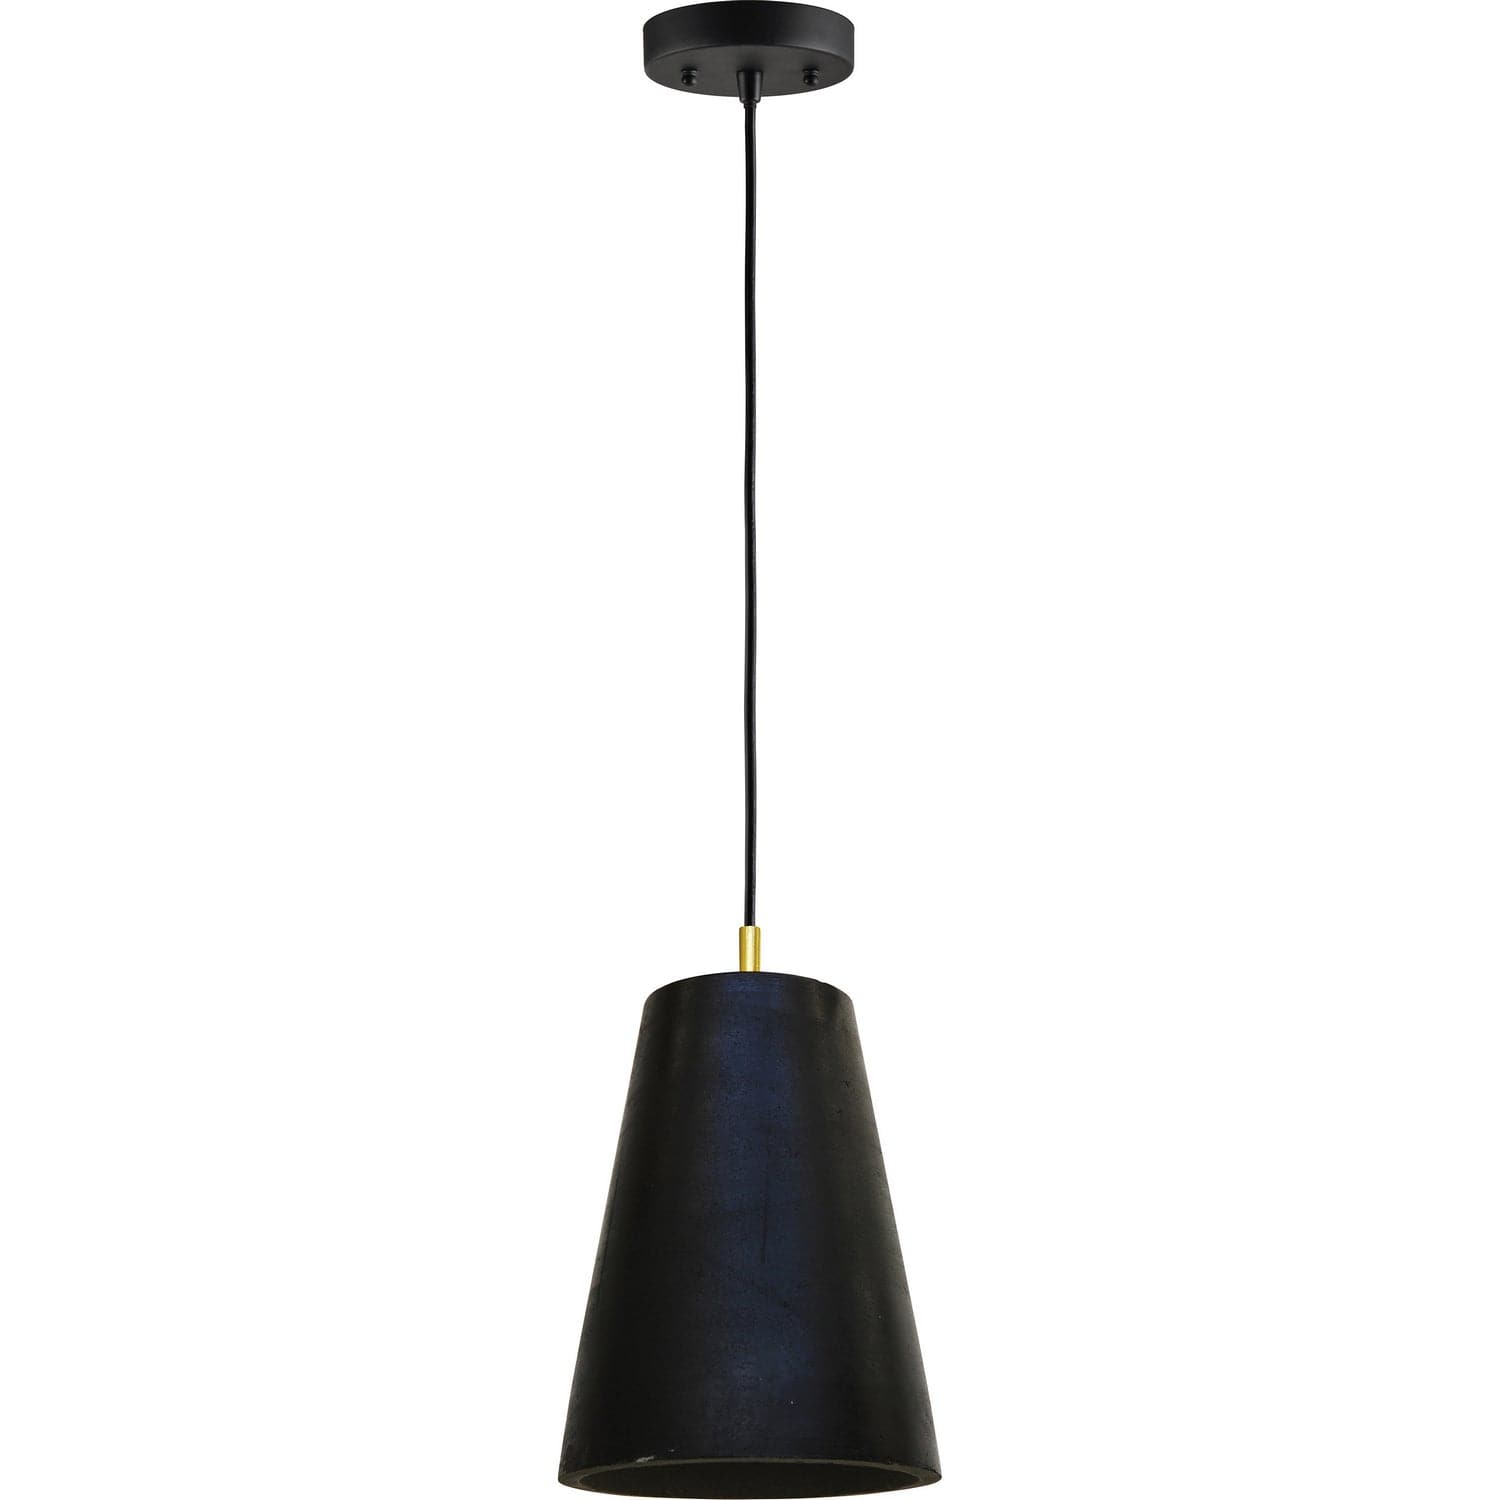 Renwil - LPC4007 - One Light Ceiling Fixture - Falla - Black Waxed Concrete / Polished Brass Hardware